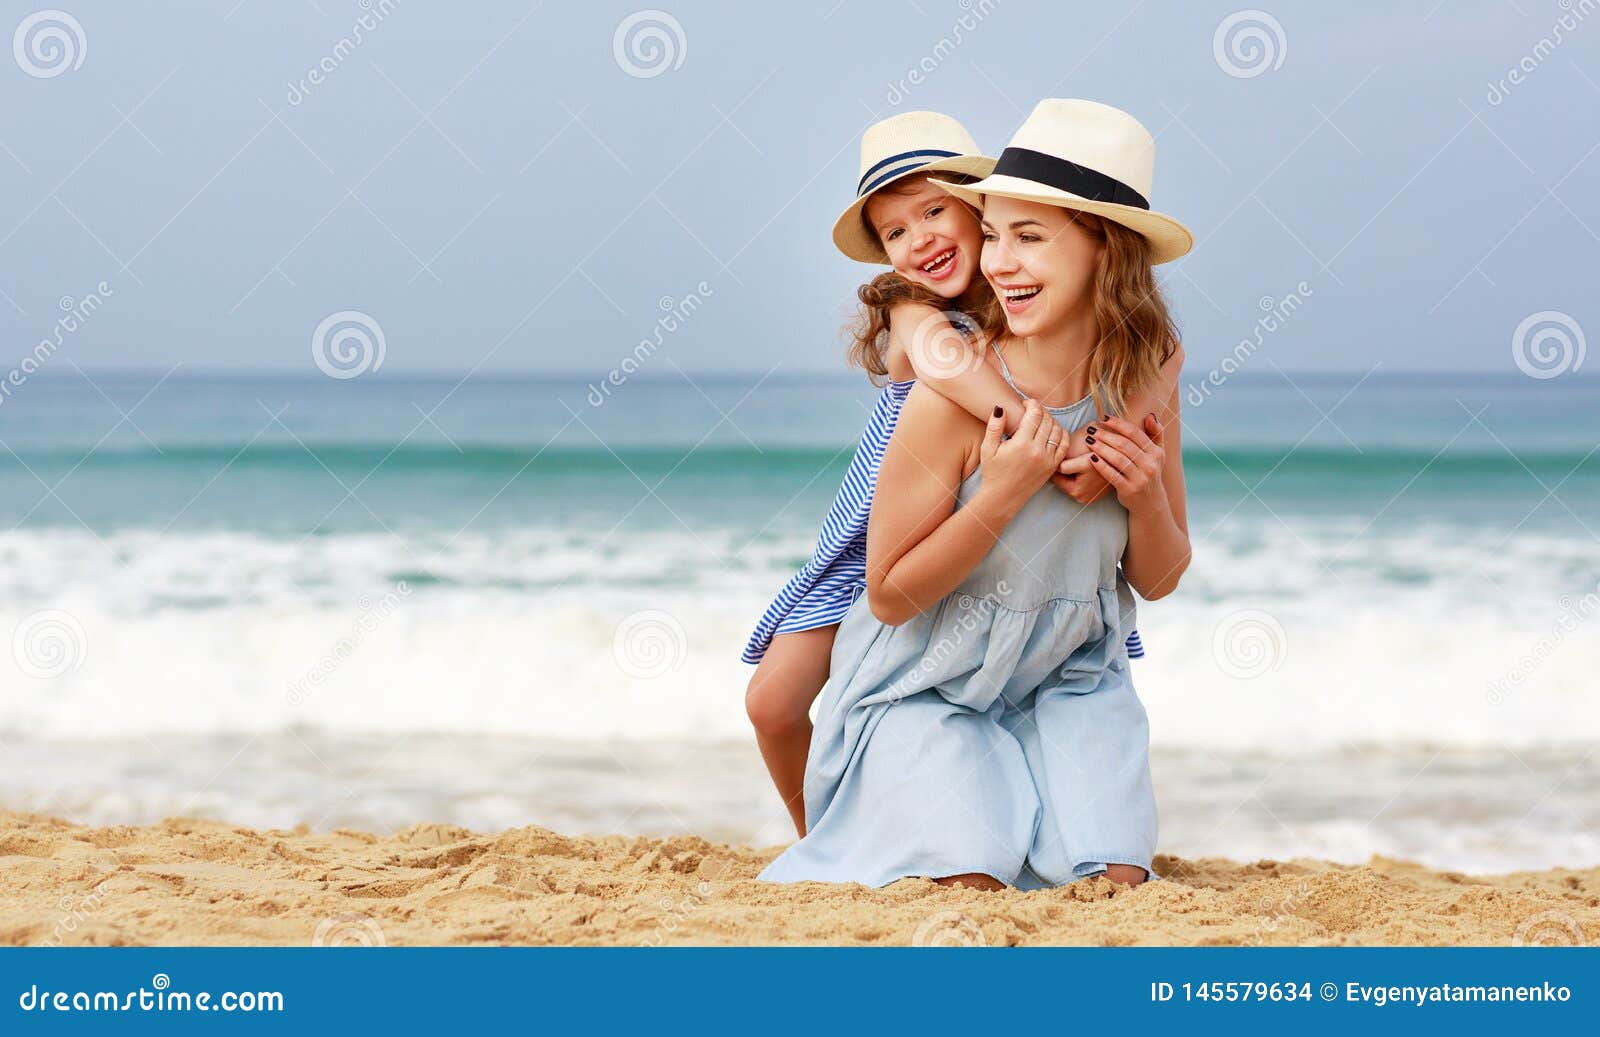 happy family at beach. mother and child daughter hug at sea